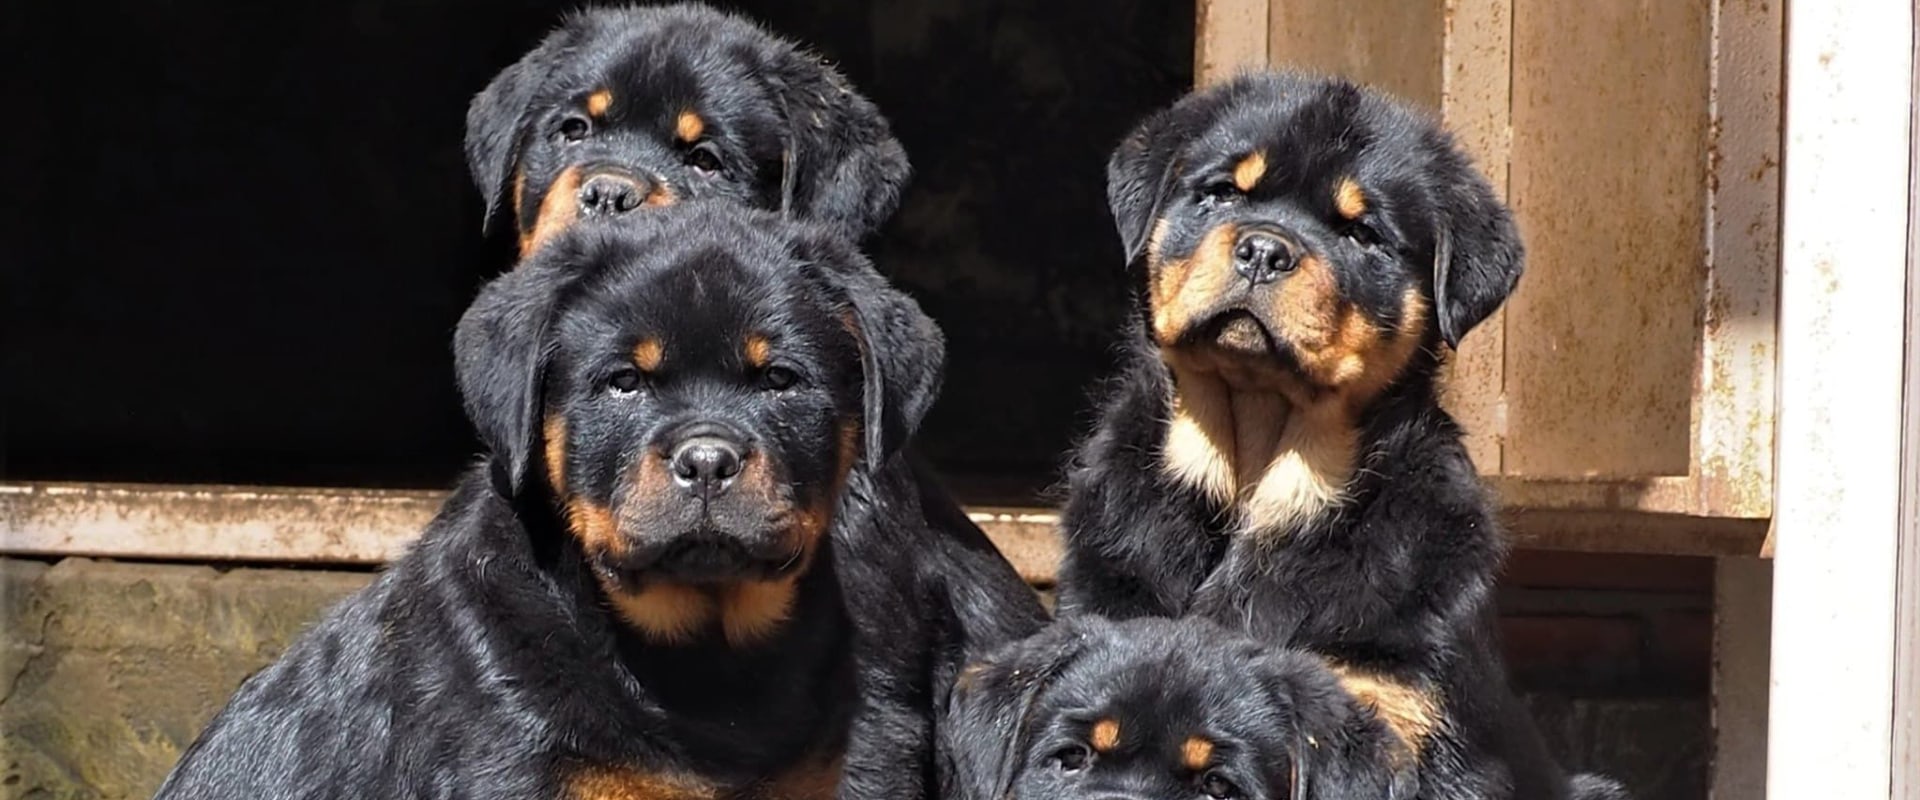 Where is rottweiler puppies home located?